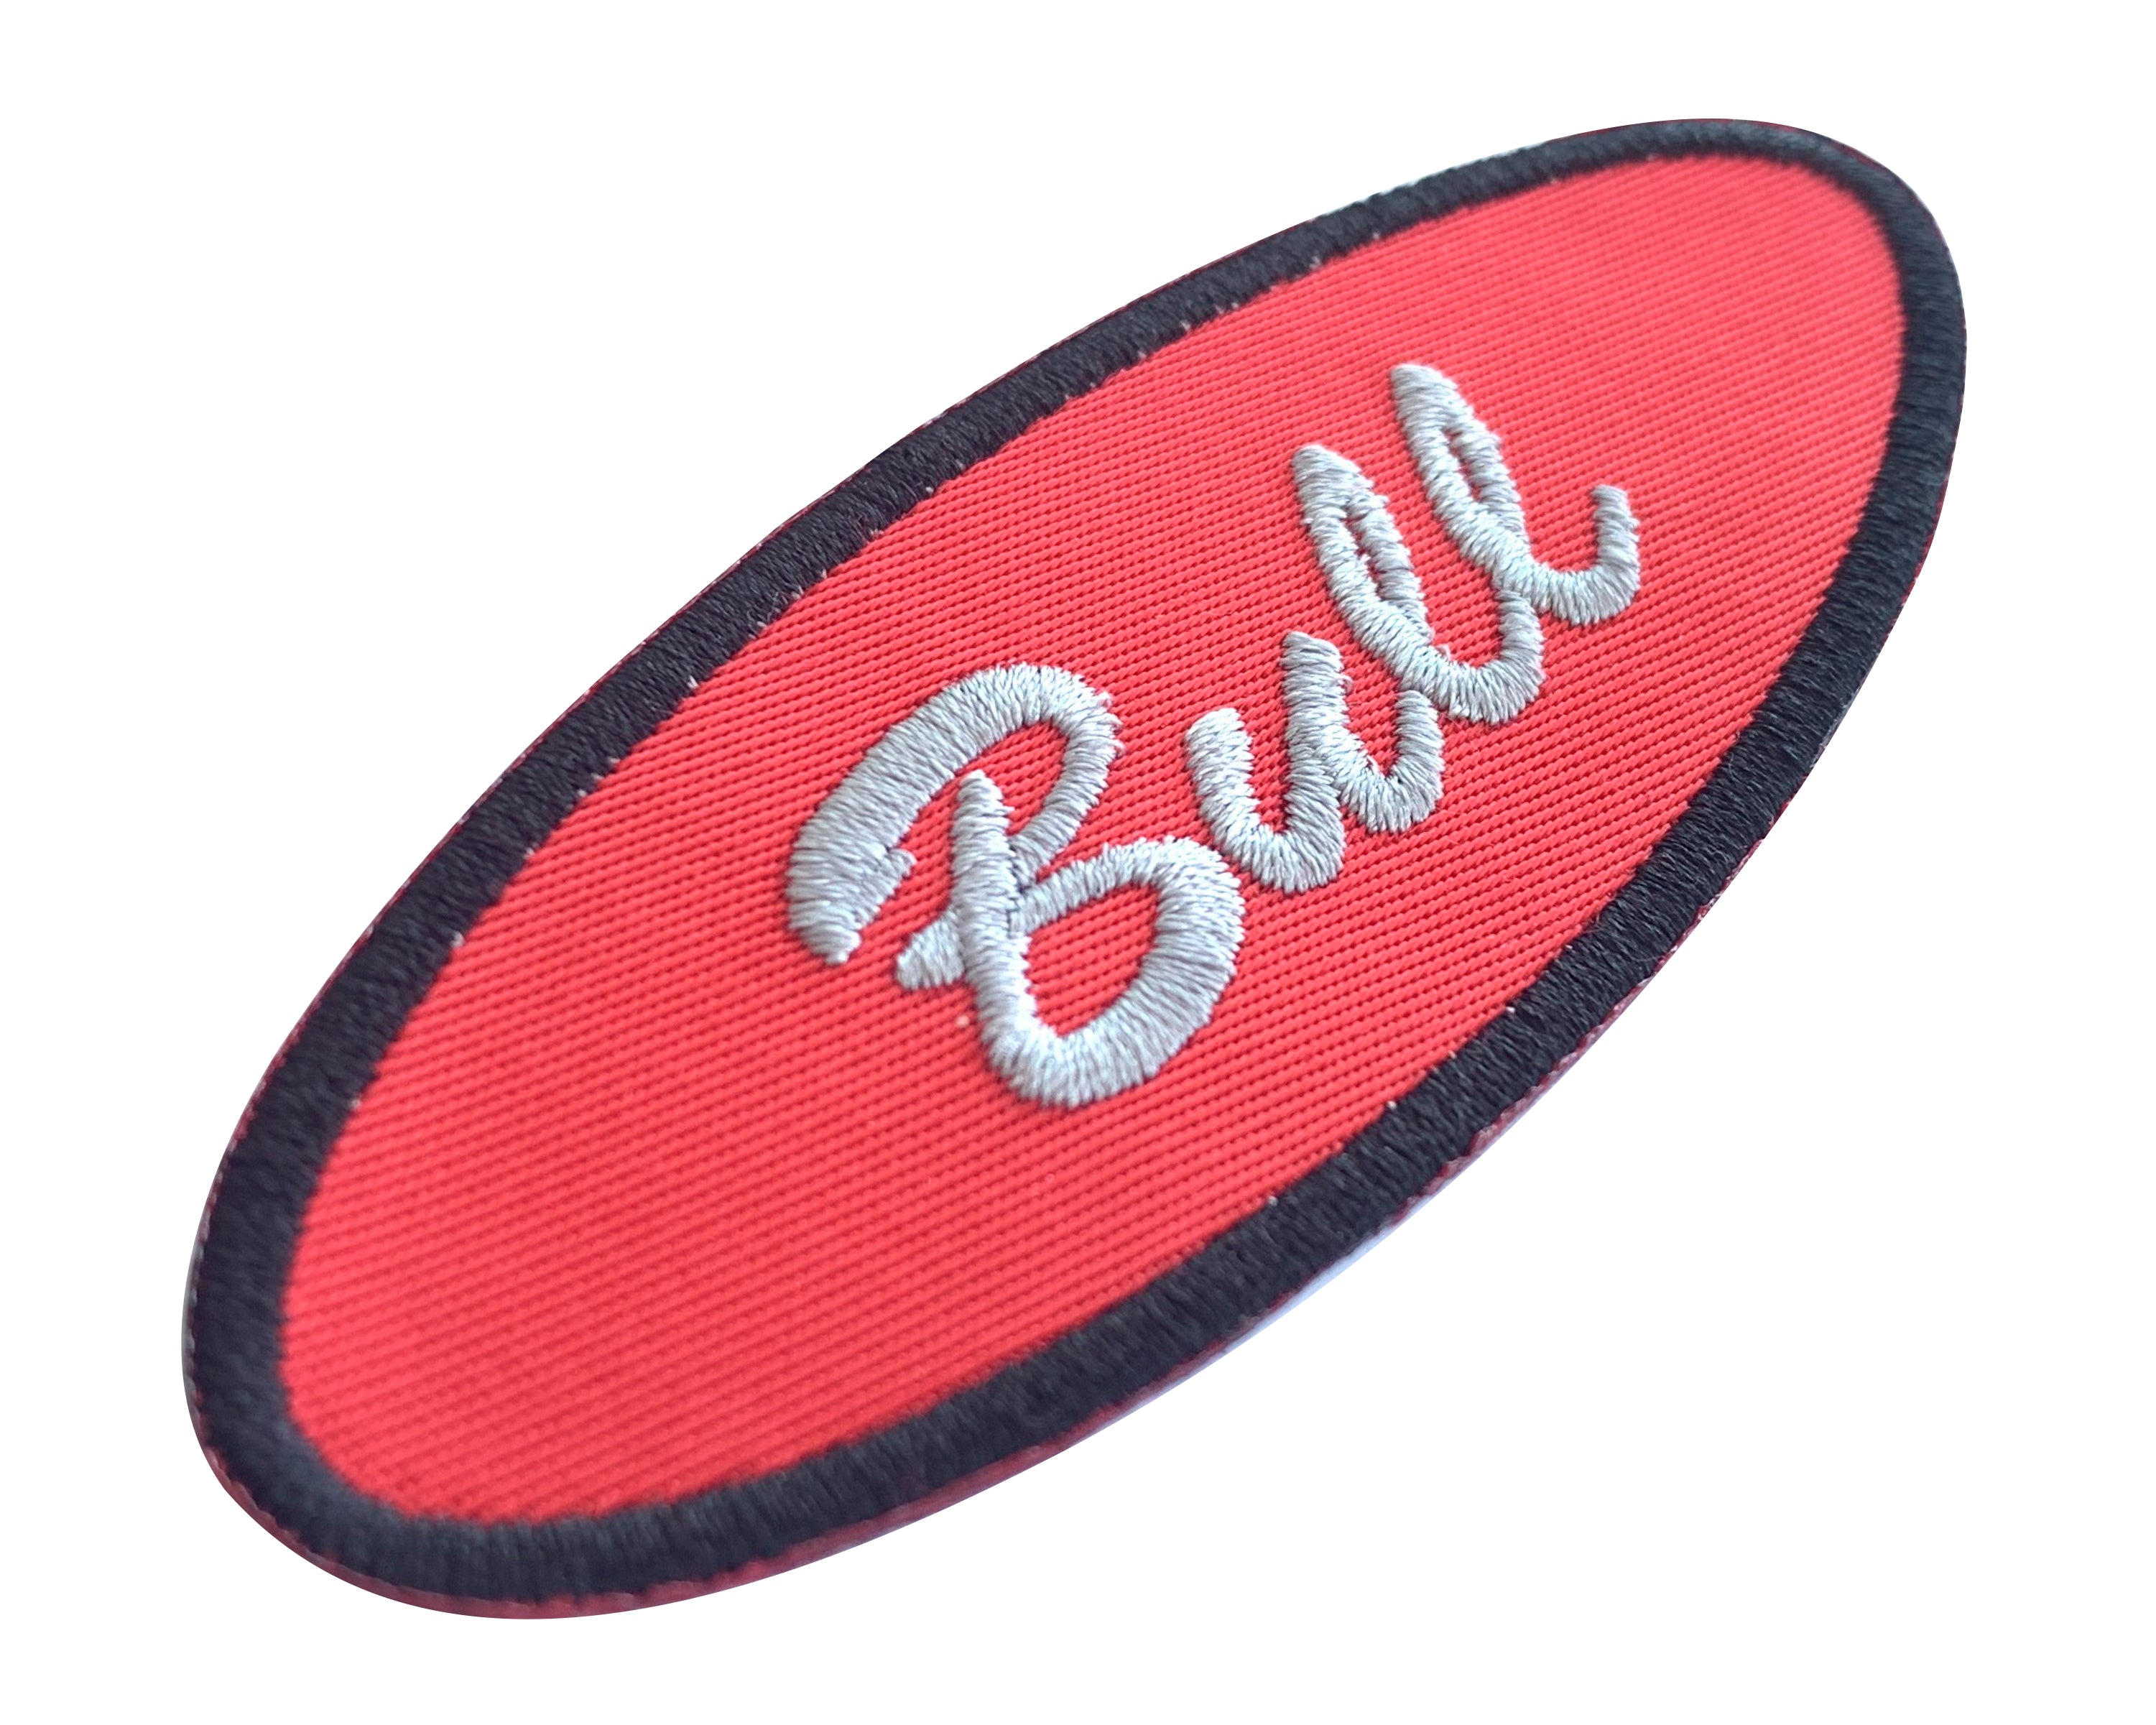 Small Embroidered Name Patch - Choose Felt/Thread